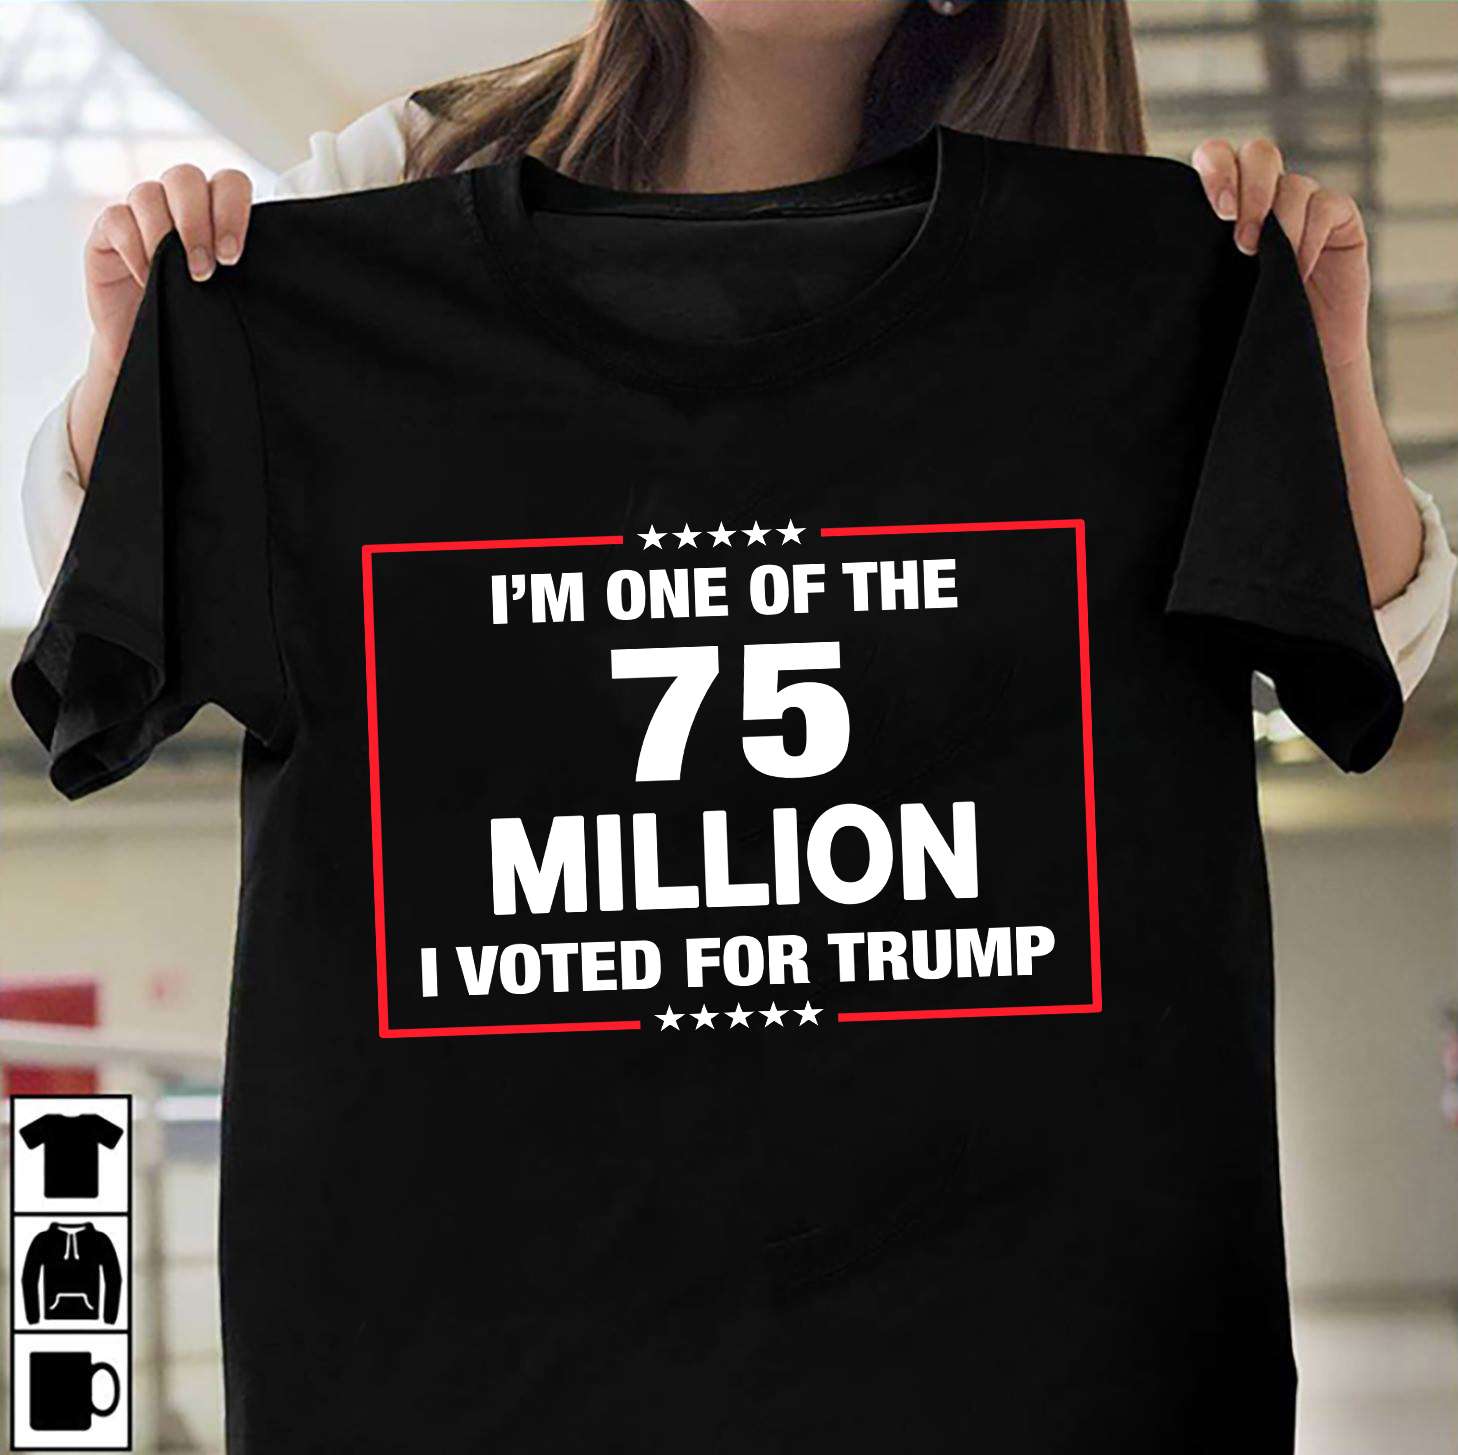 I'm one of the 75 million I vote for Trump - 75 supporter of Trump, Donald Trump America president